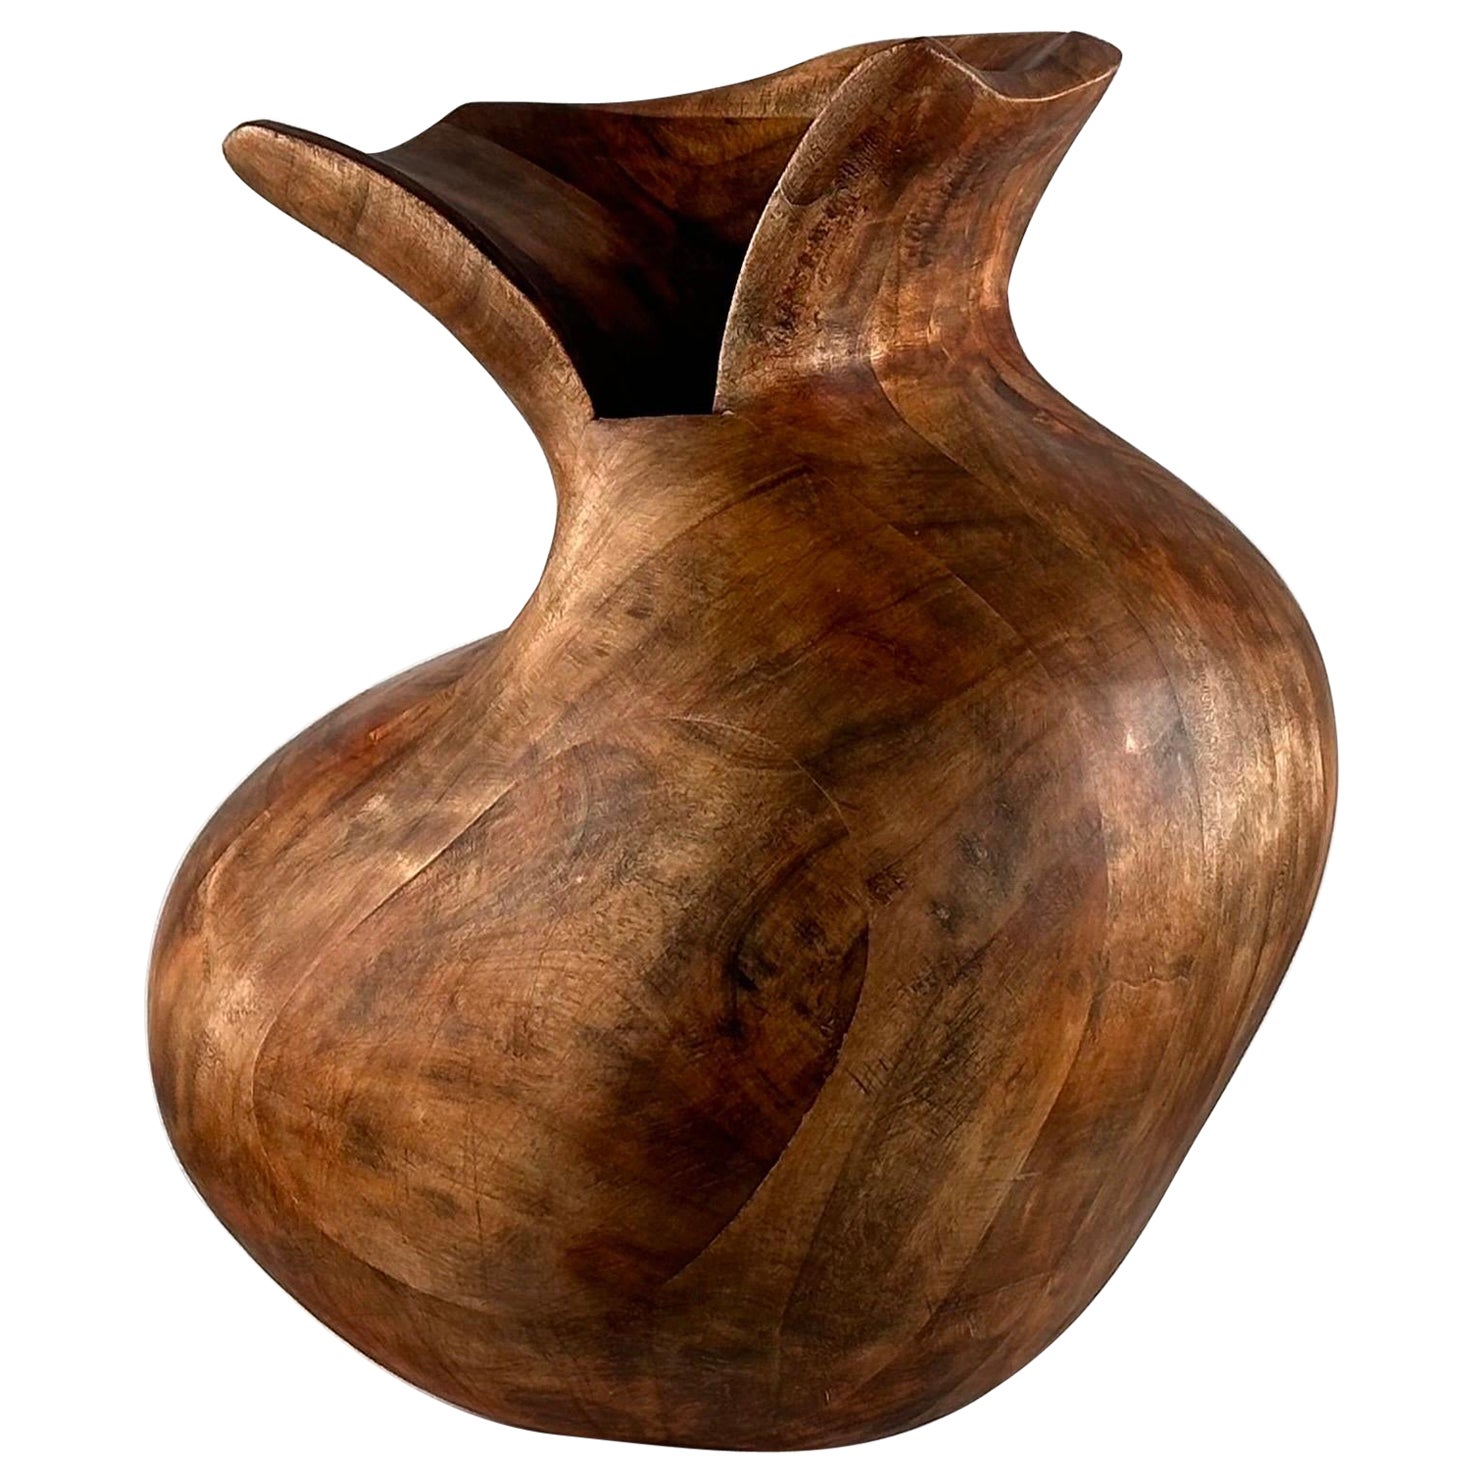 Phytomorphic Sculptural Wooden Vase, 1960, Italy For Sale